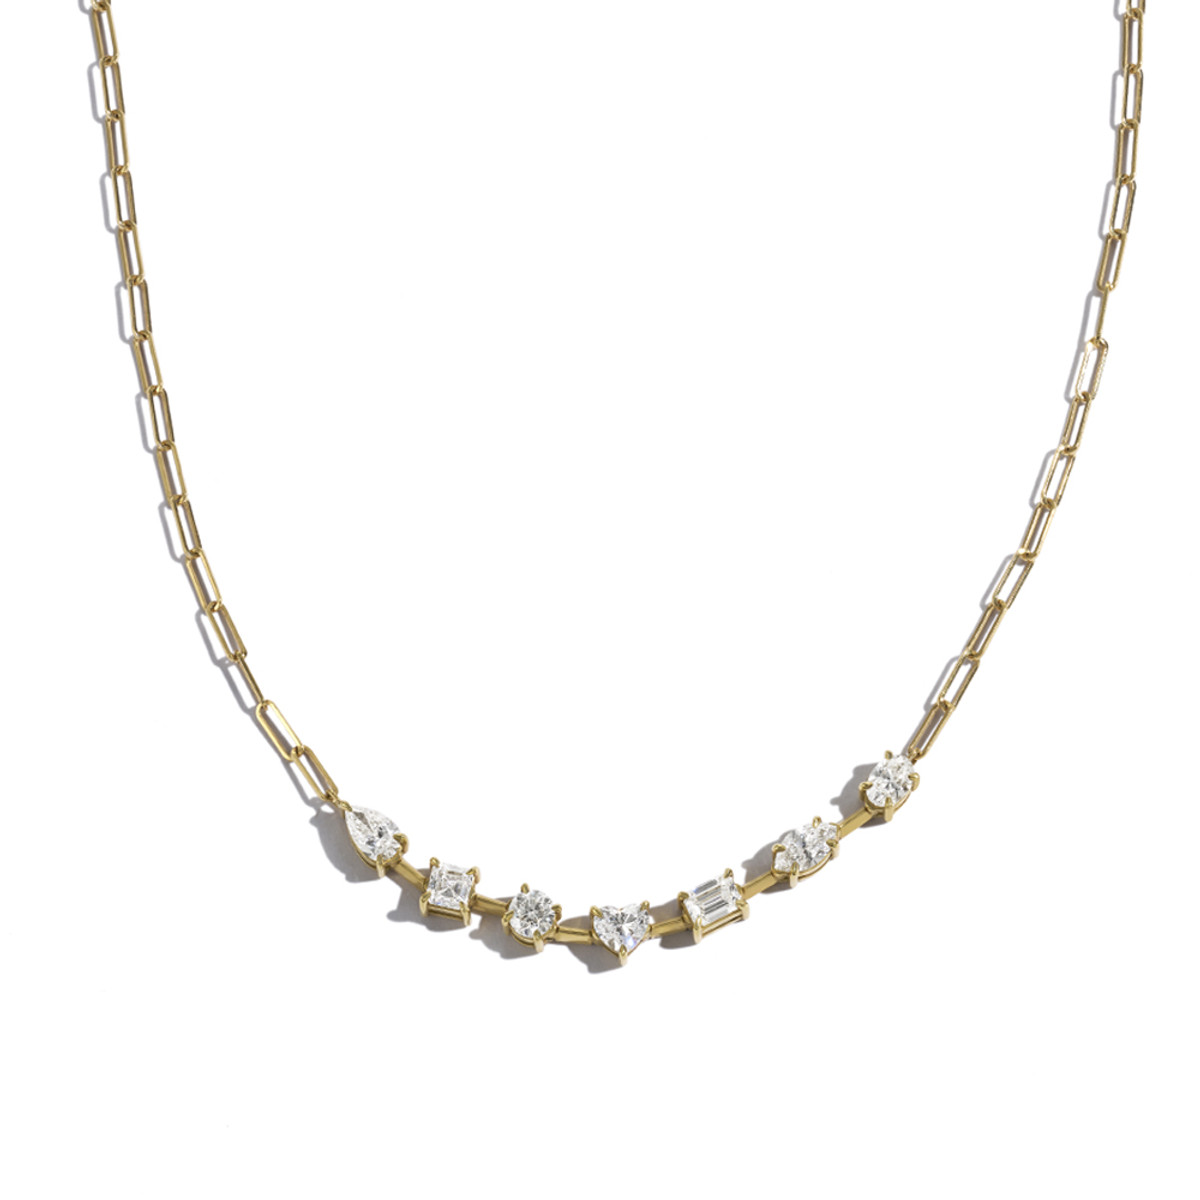 HYDE PARK 18K YELLOW GOLD FANCY SHAPES FLOATING DIAMOND NECKLACE-44014